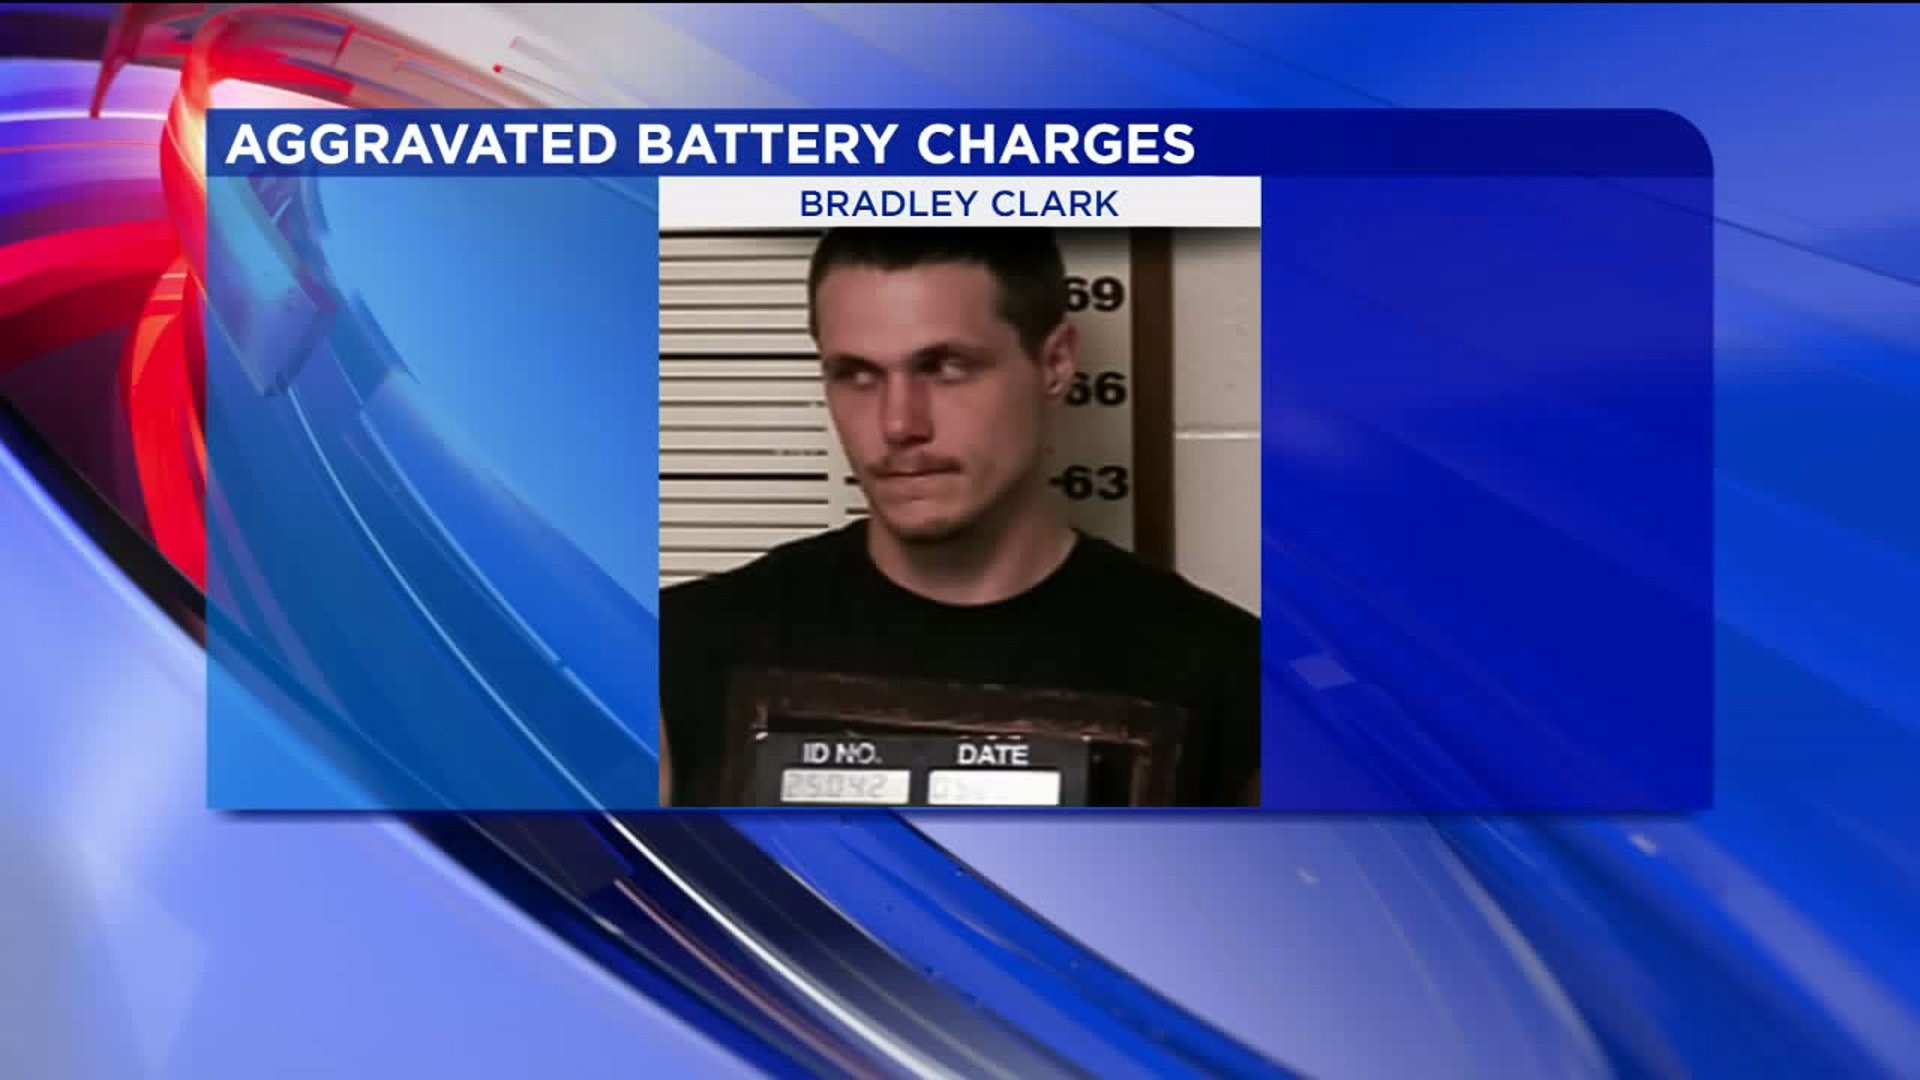 Clark charged for aggravated battery